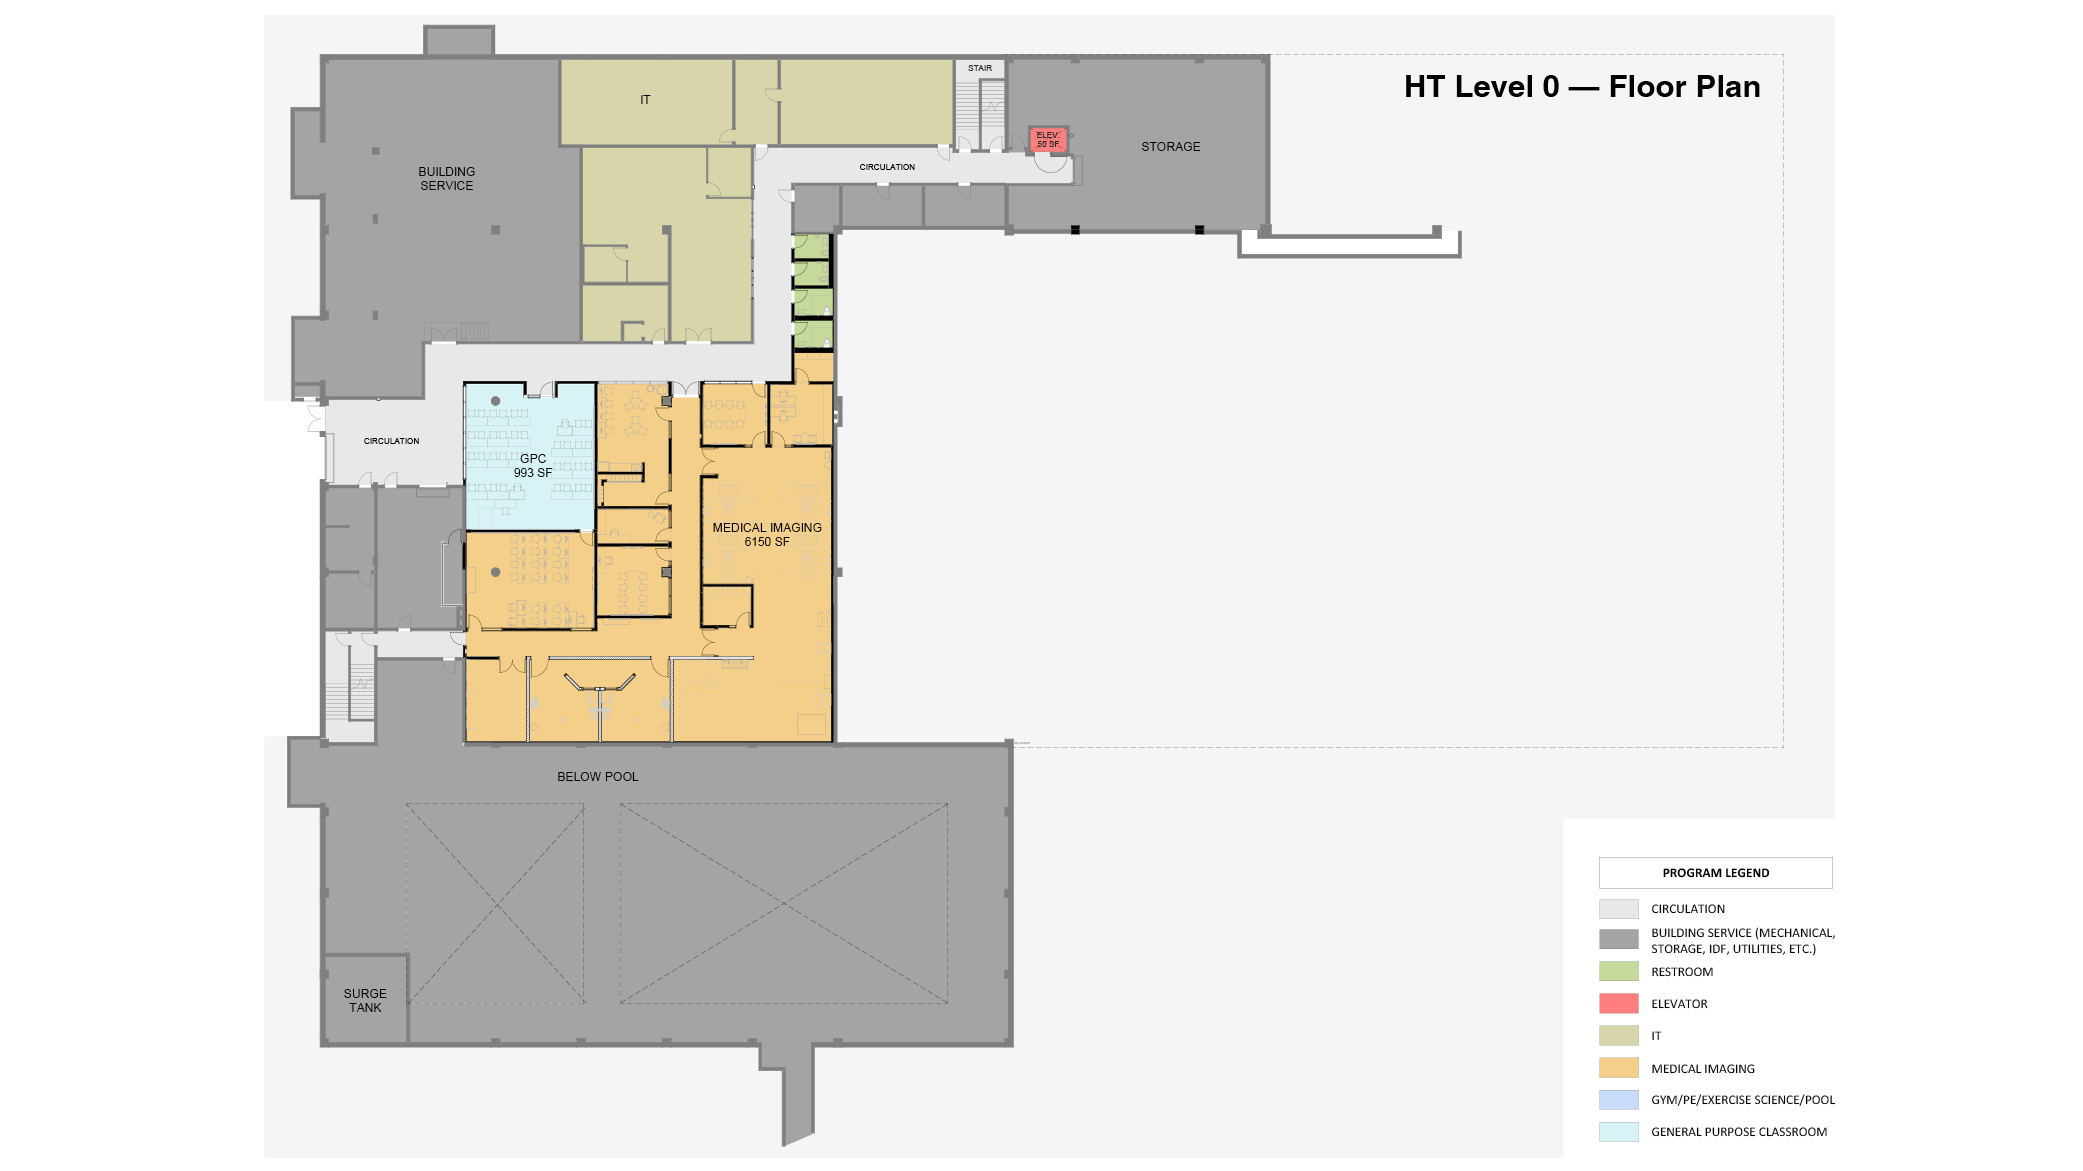 HT Level 0 floor plan showing area for IT, Medical Imaging, all-user restrooms and elevator